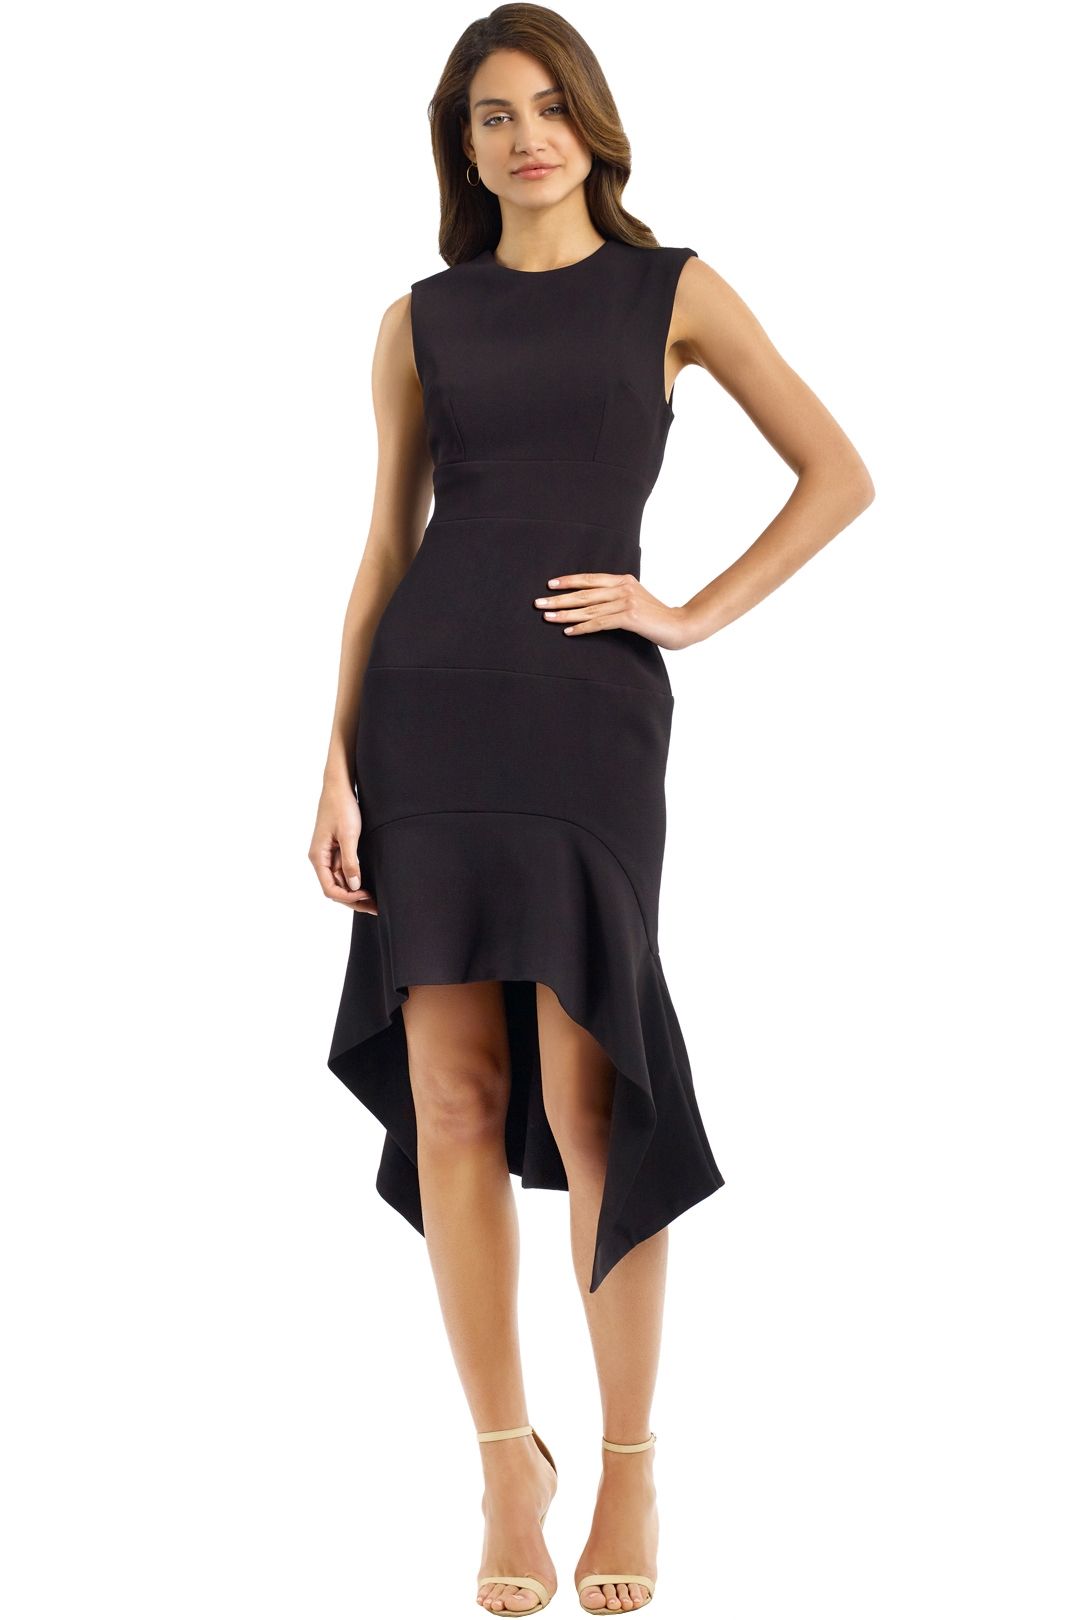 By Johnny - Midnight Panel Shift Dress - Black - Front